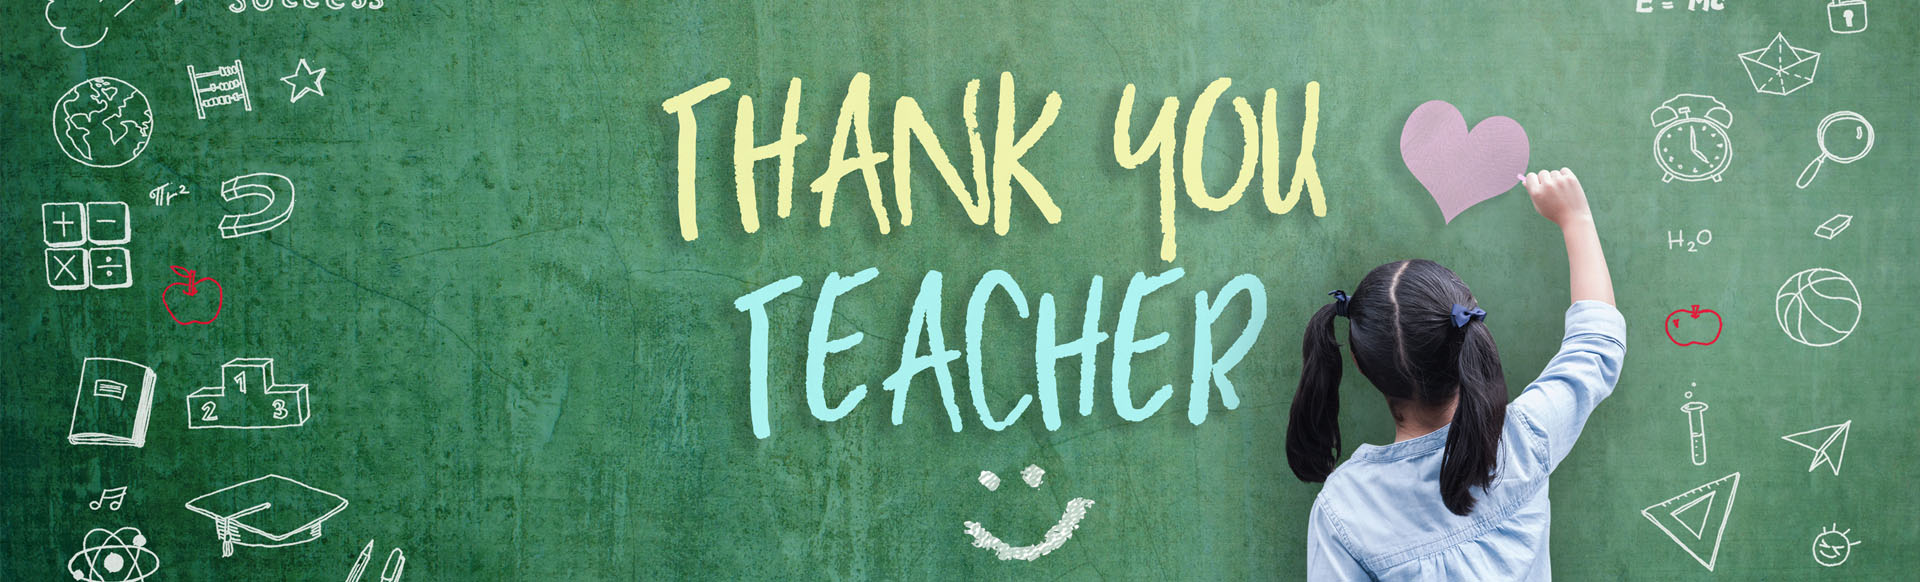 Image showing a girl writing "Thank you teacher" on a large chalkboard